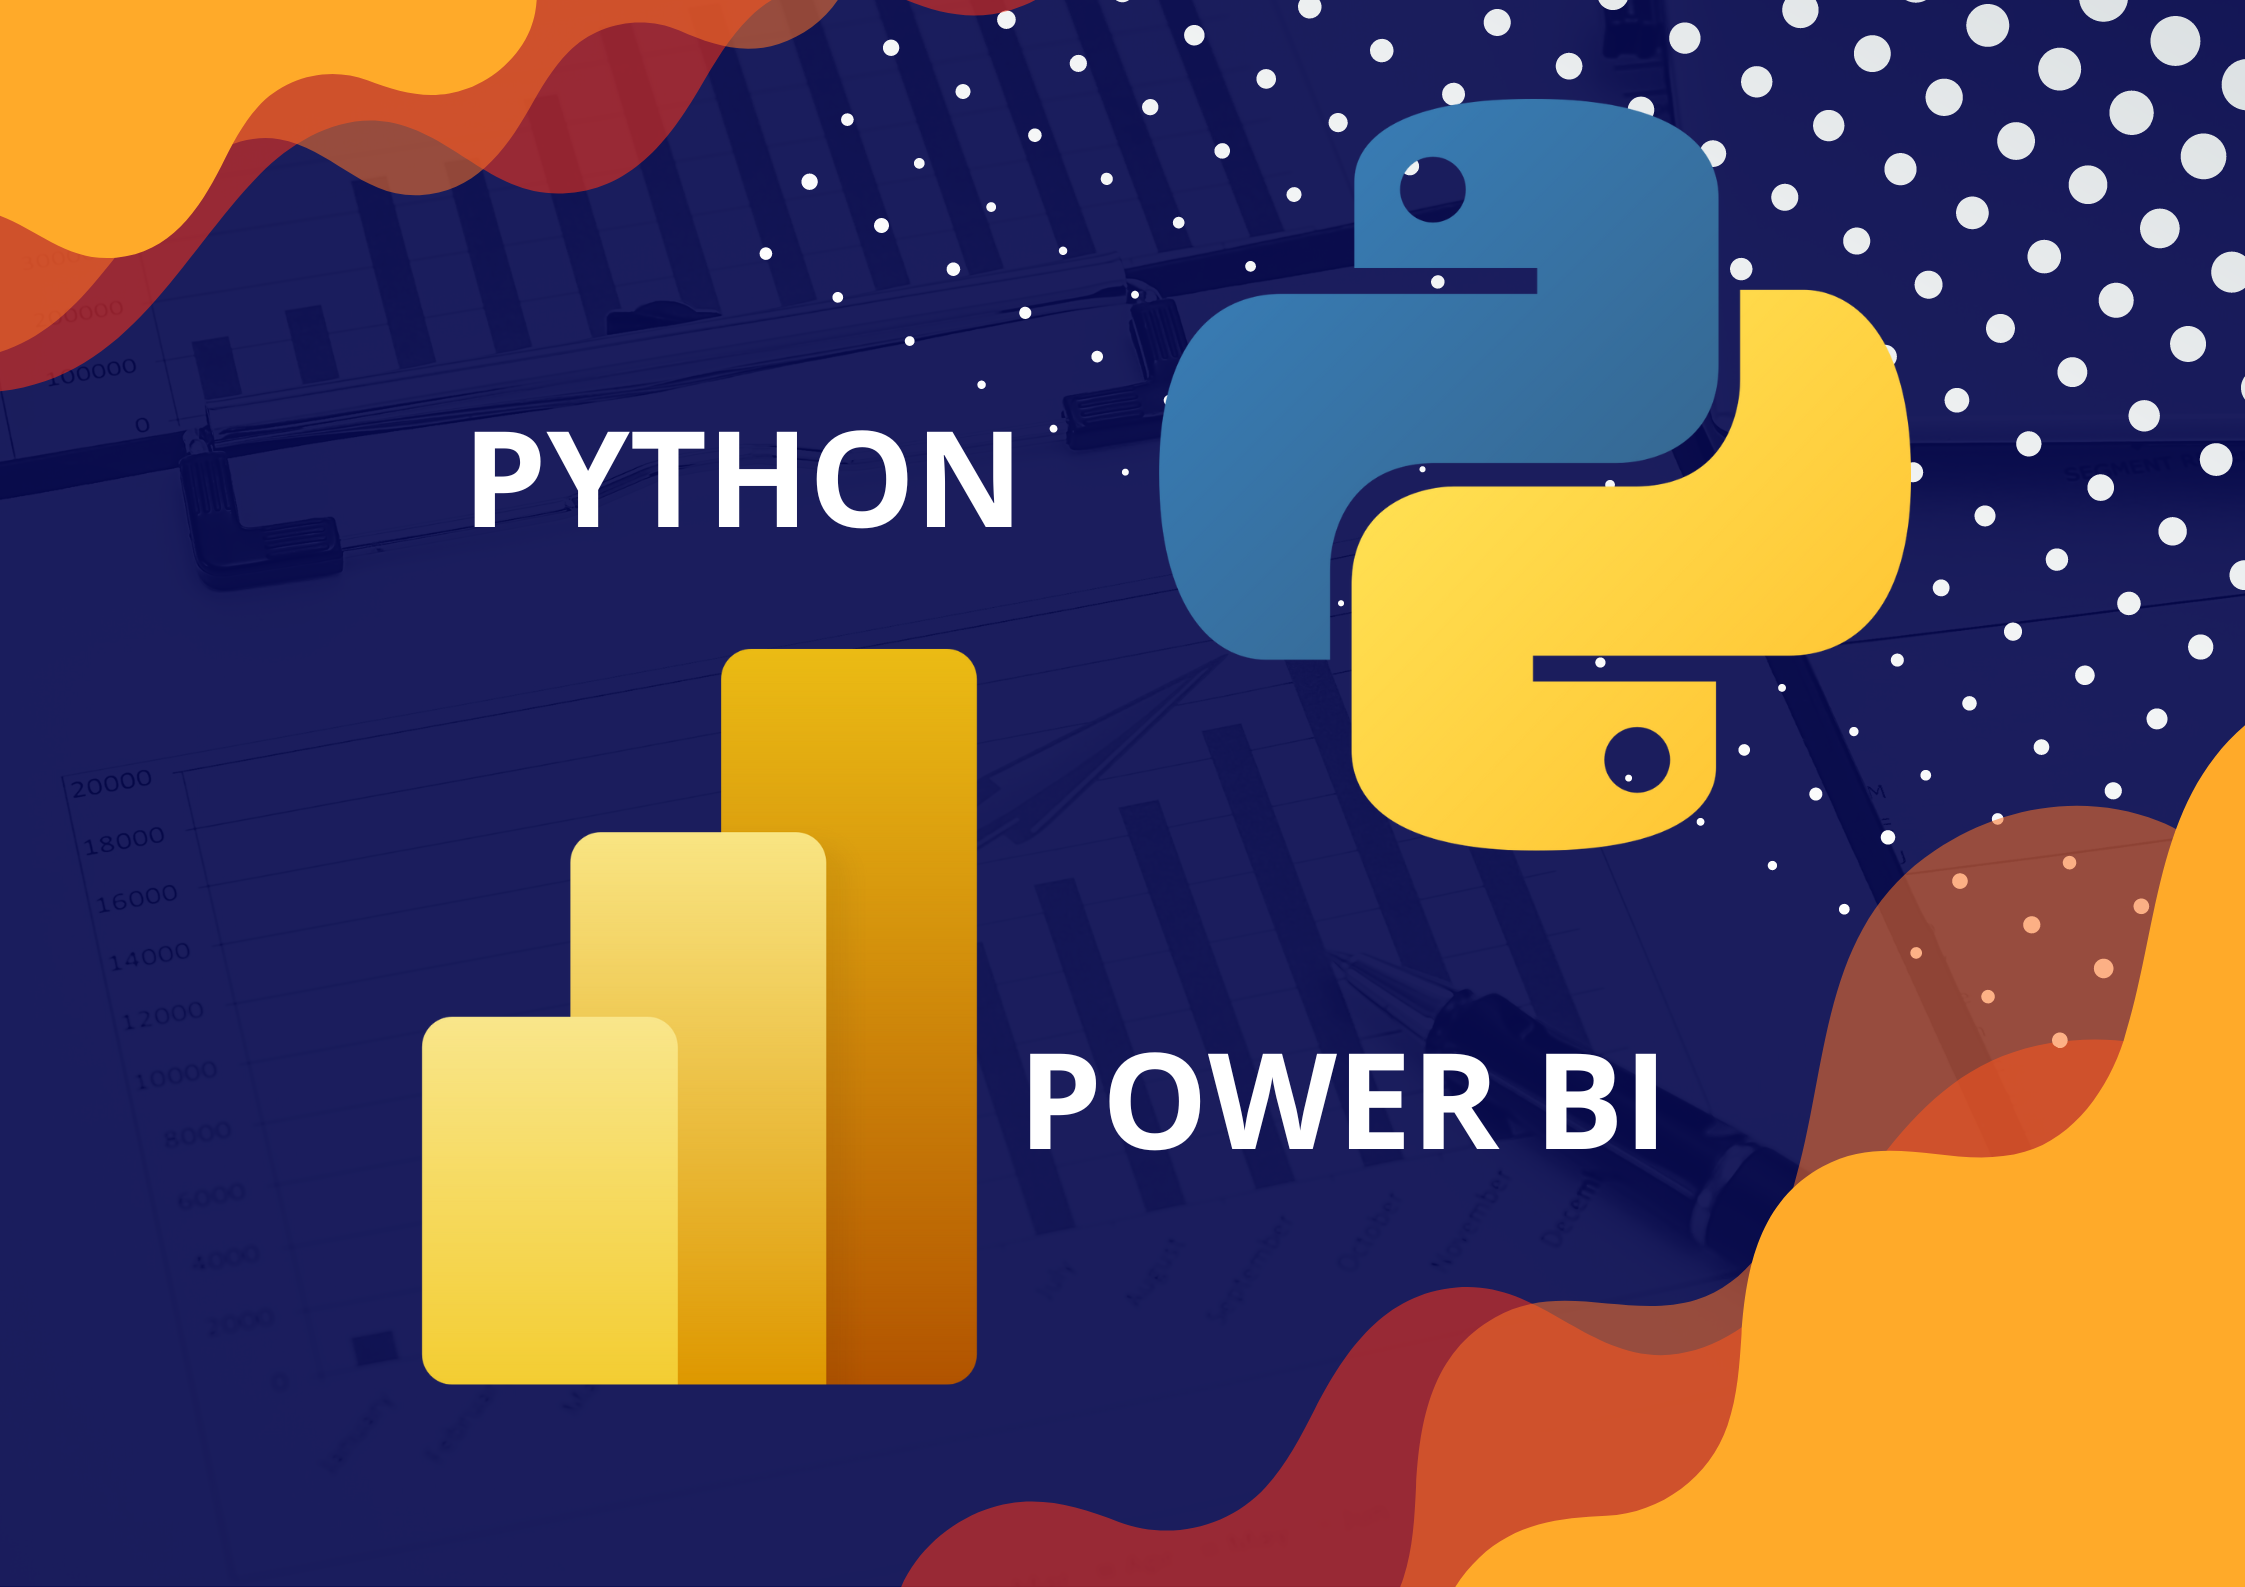 How to Use Python in Power BI